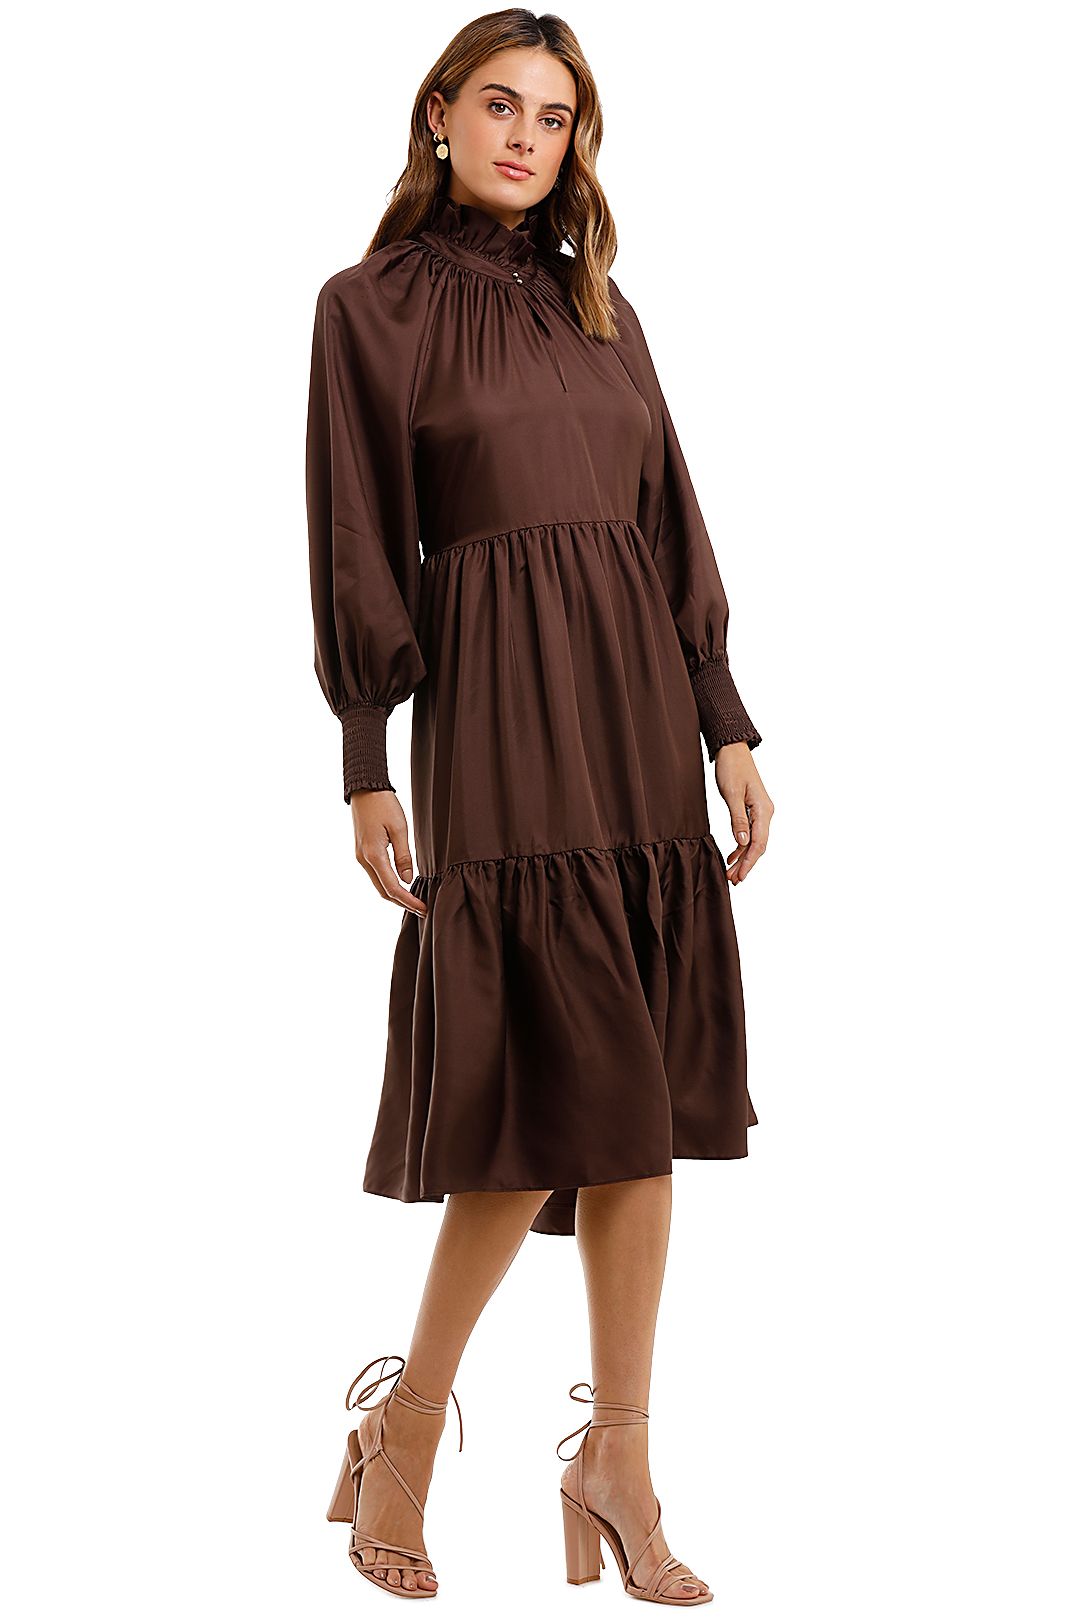 Husk Manor Dress Chocolate Brown Relaxed Fit